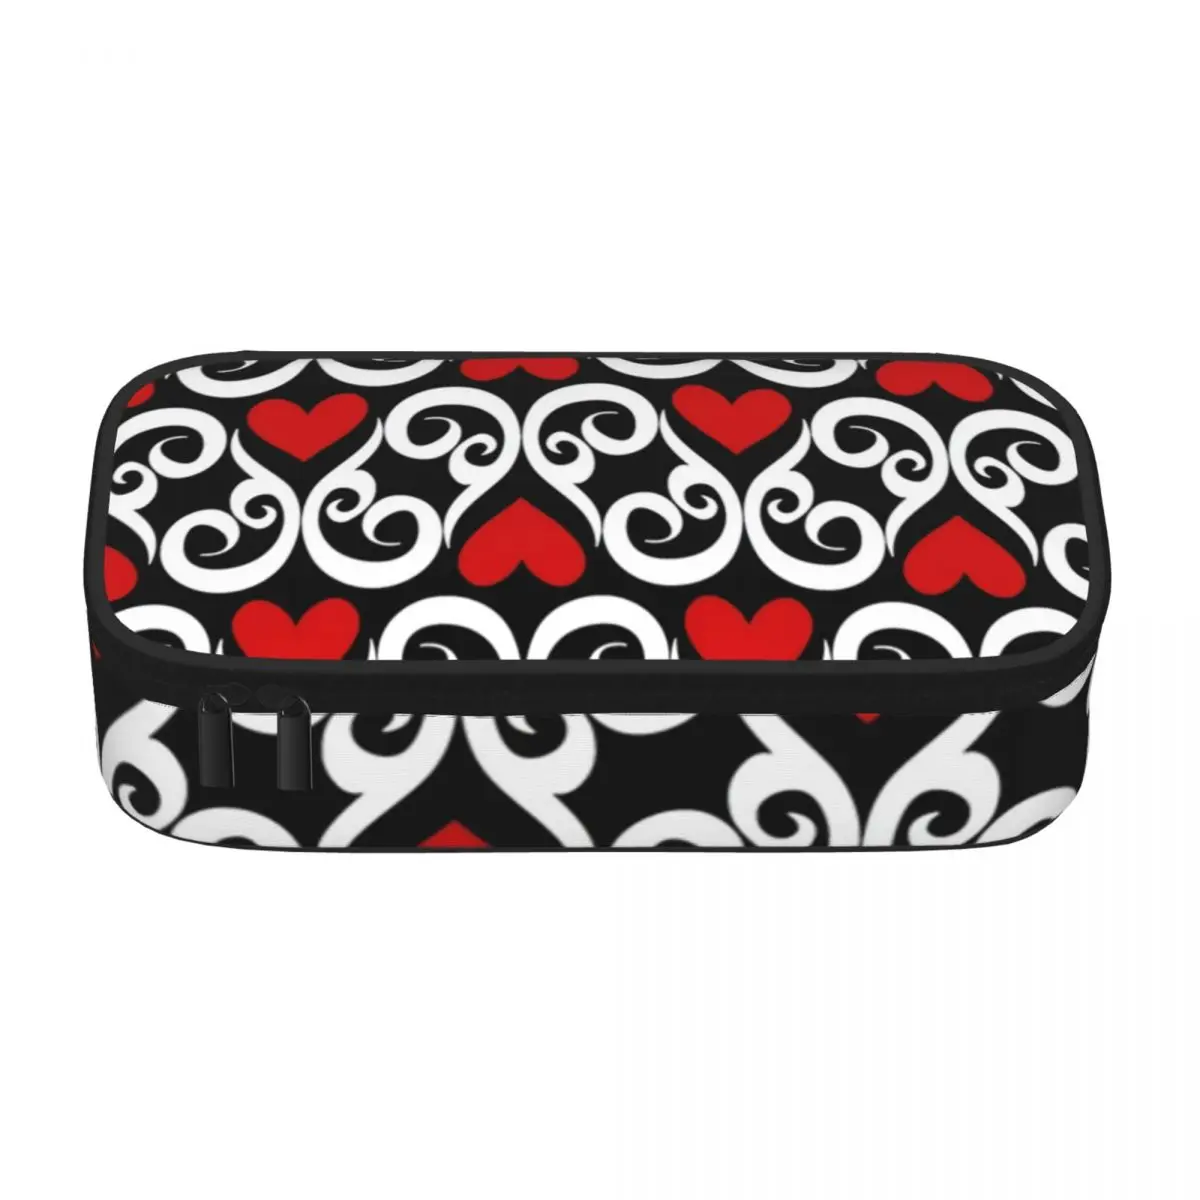 Queen Of Hearts Pencil Case Abstract Print Stationery Large Zipper Pencil Box Girls Boys Kawaii Pen Bags